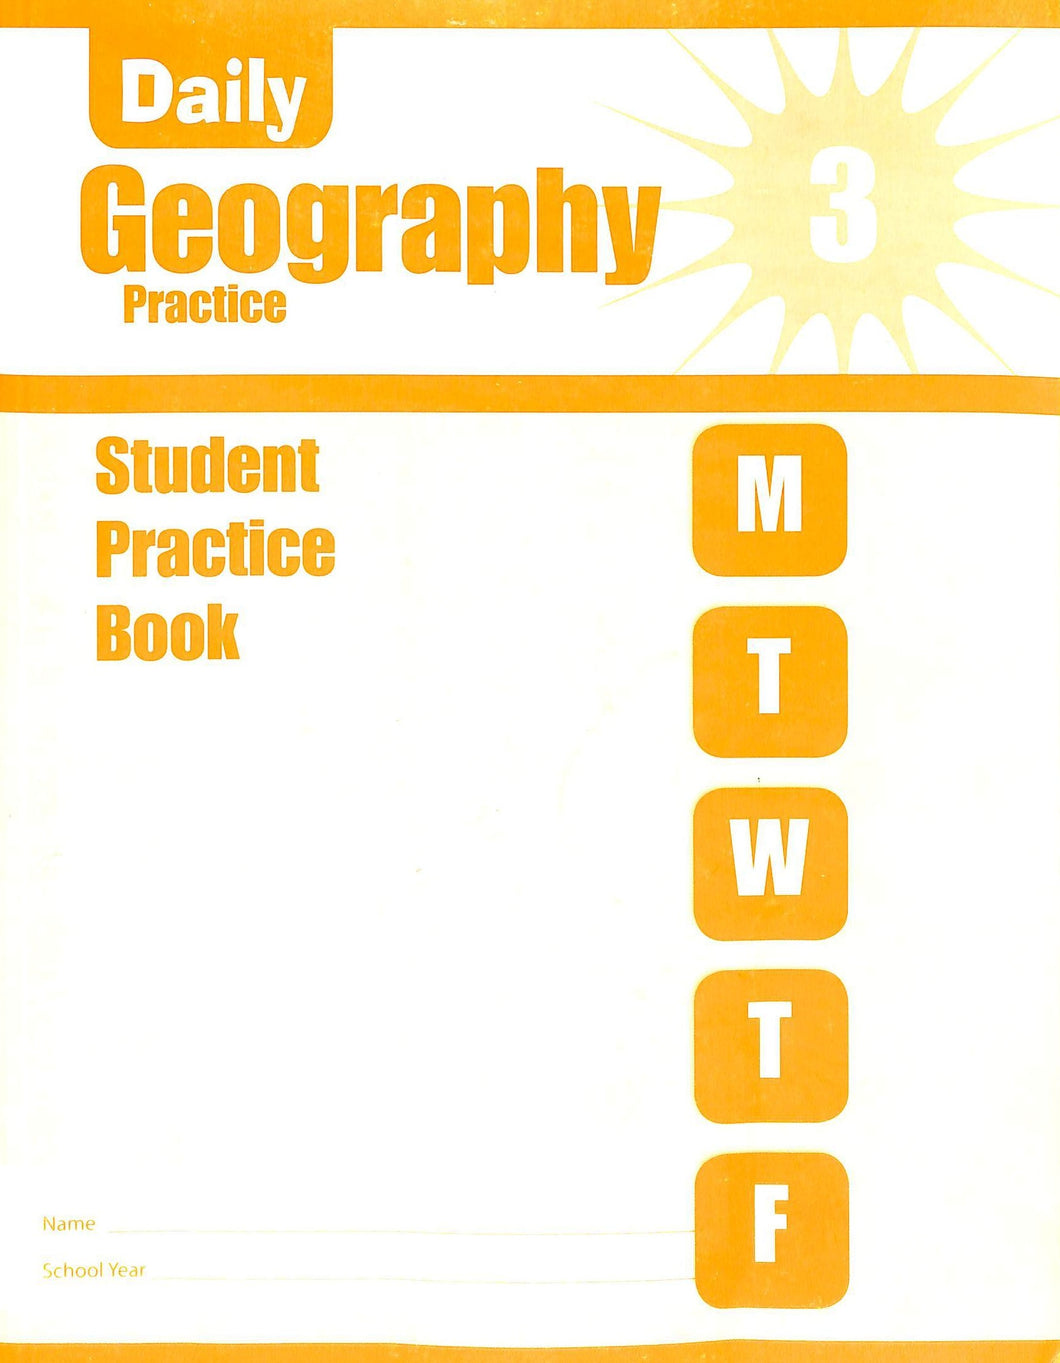 Daily Geography Practice 3 Workbook